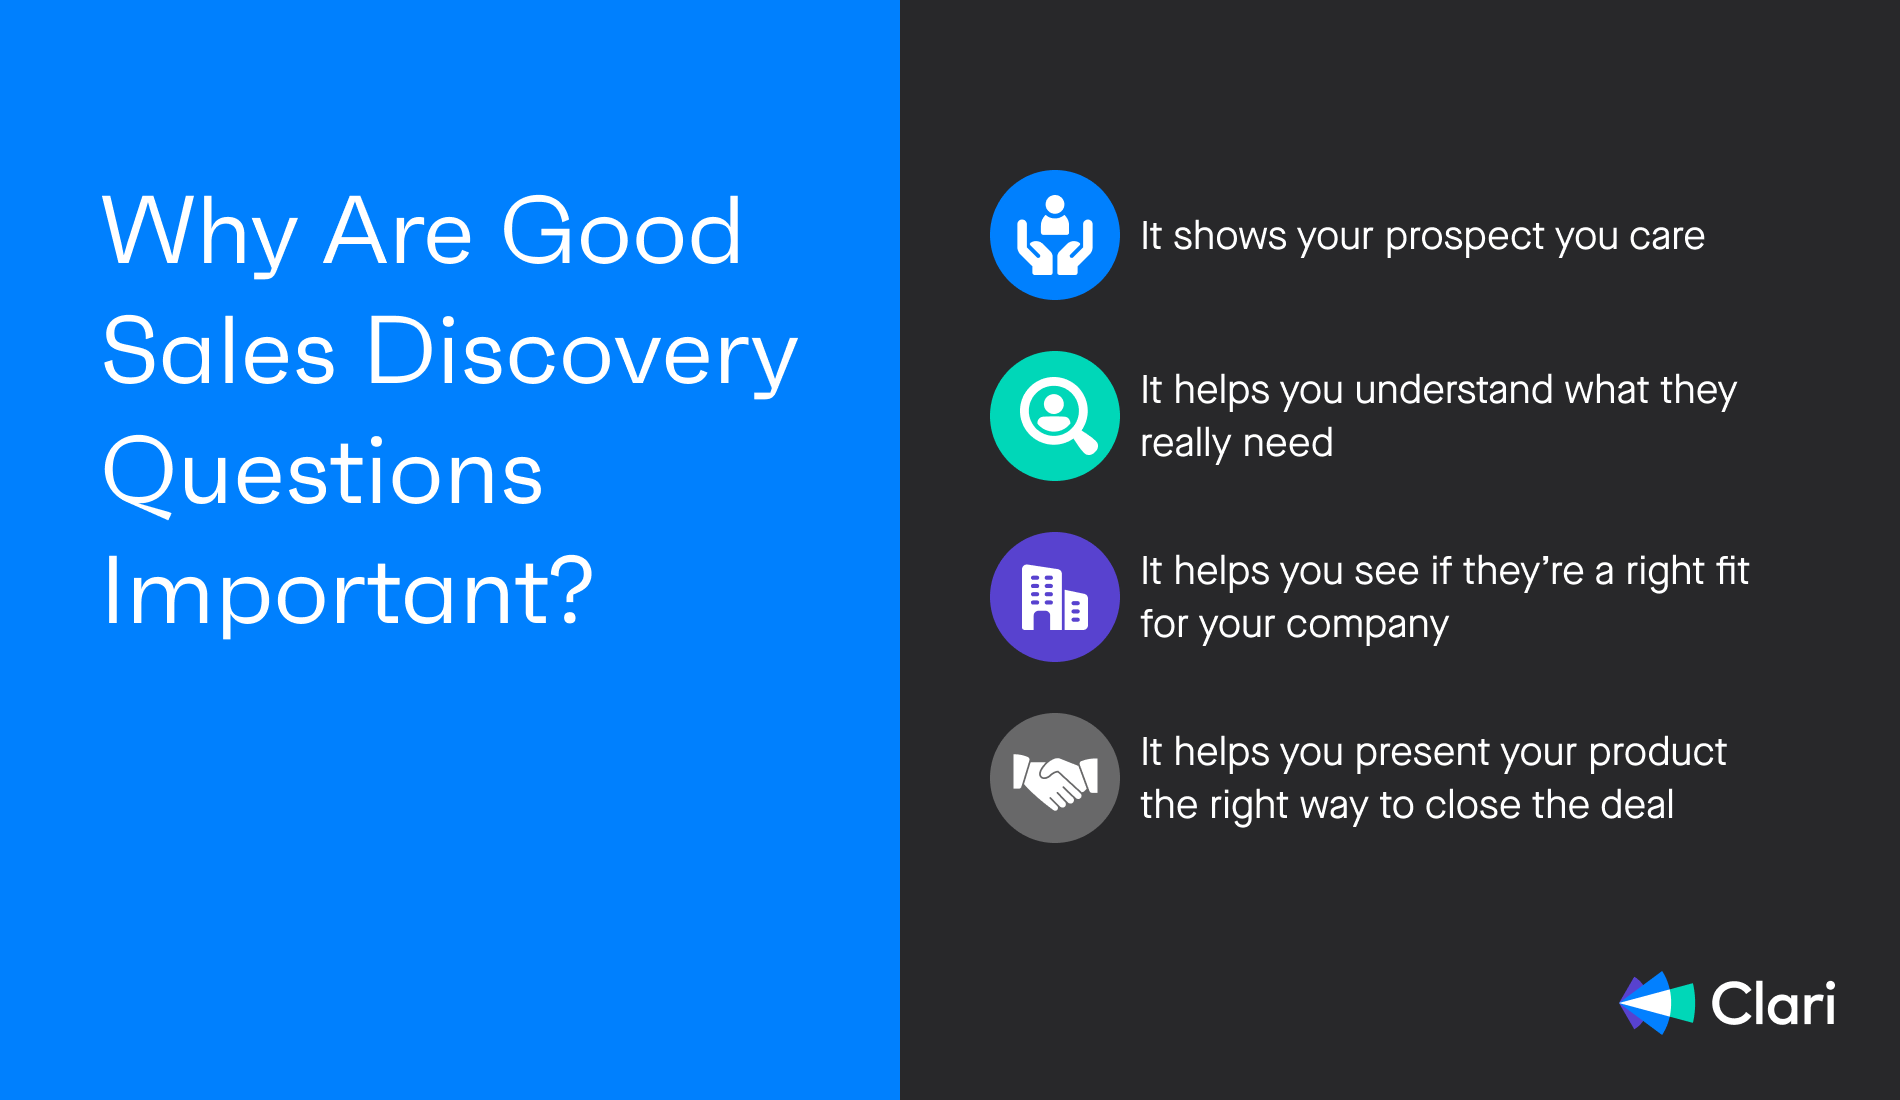 Why are good sales discovery questions important?